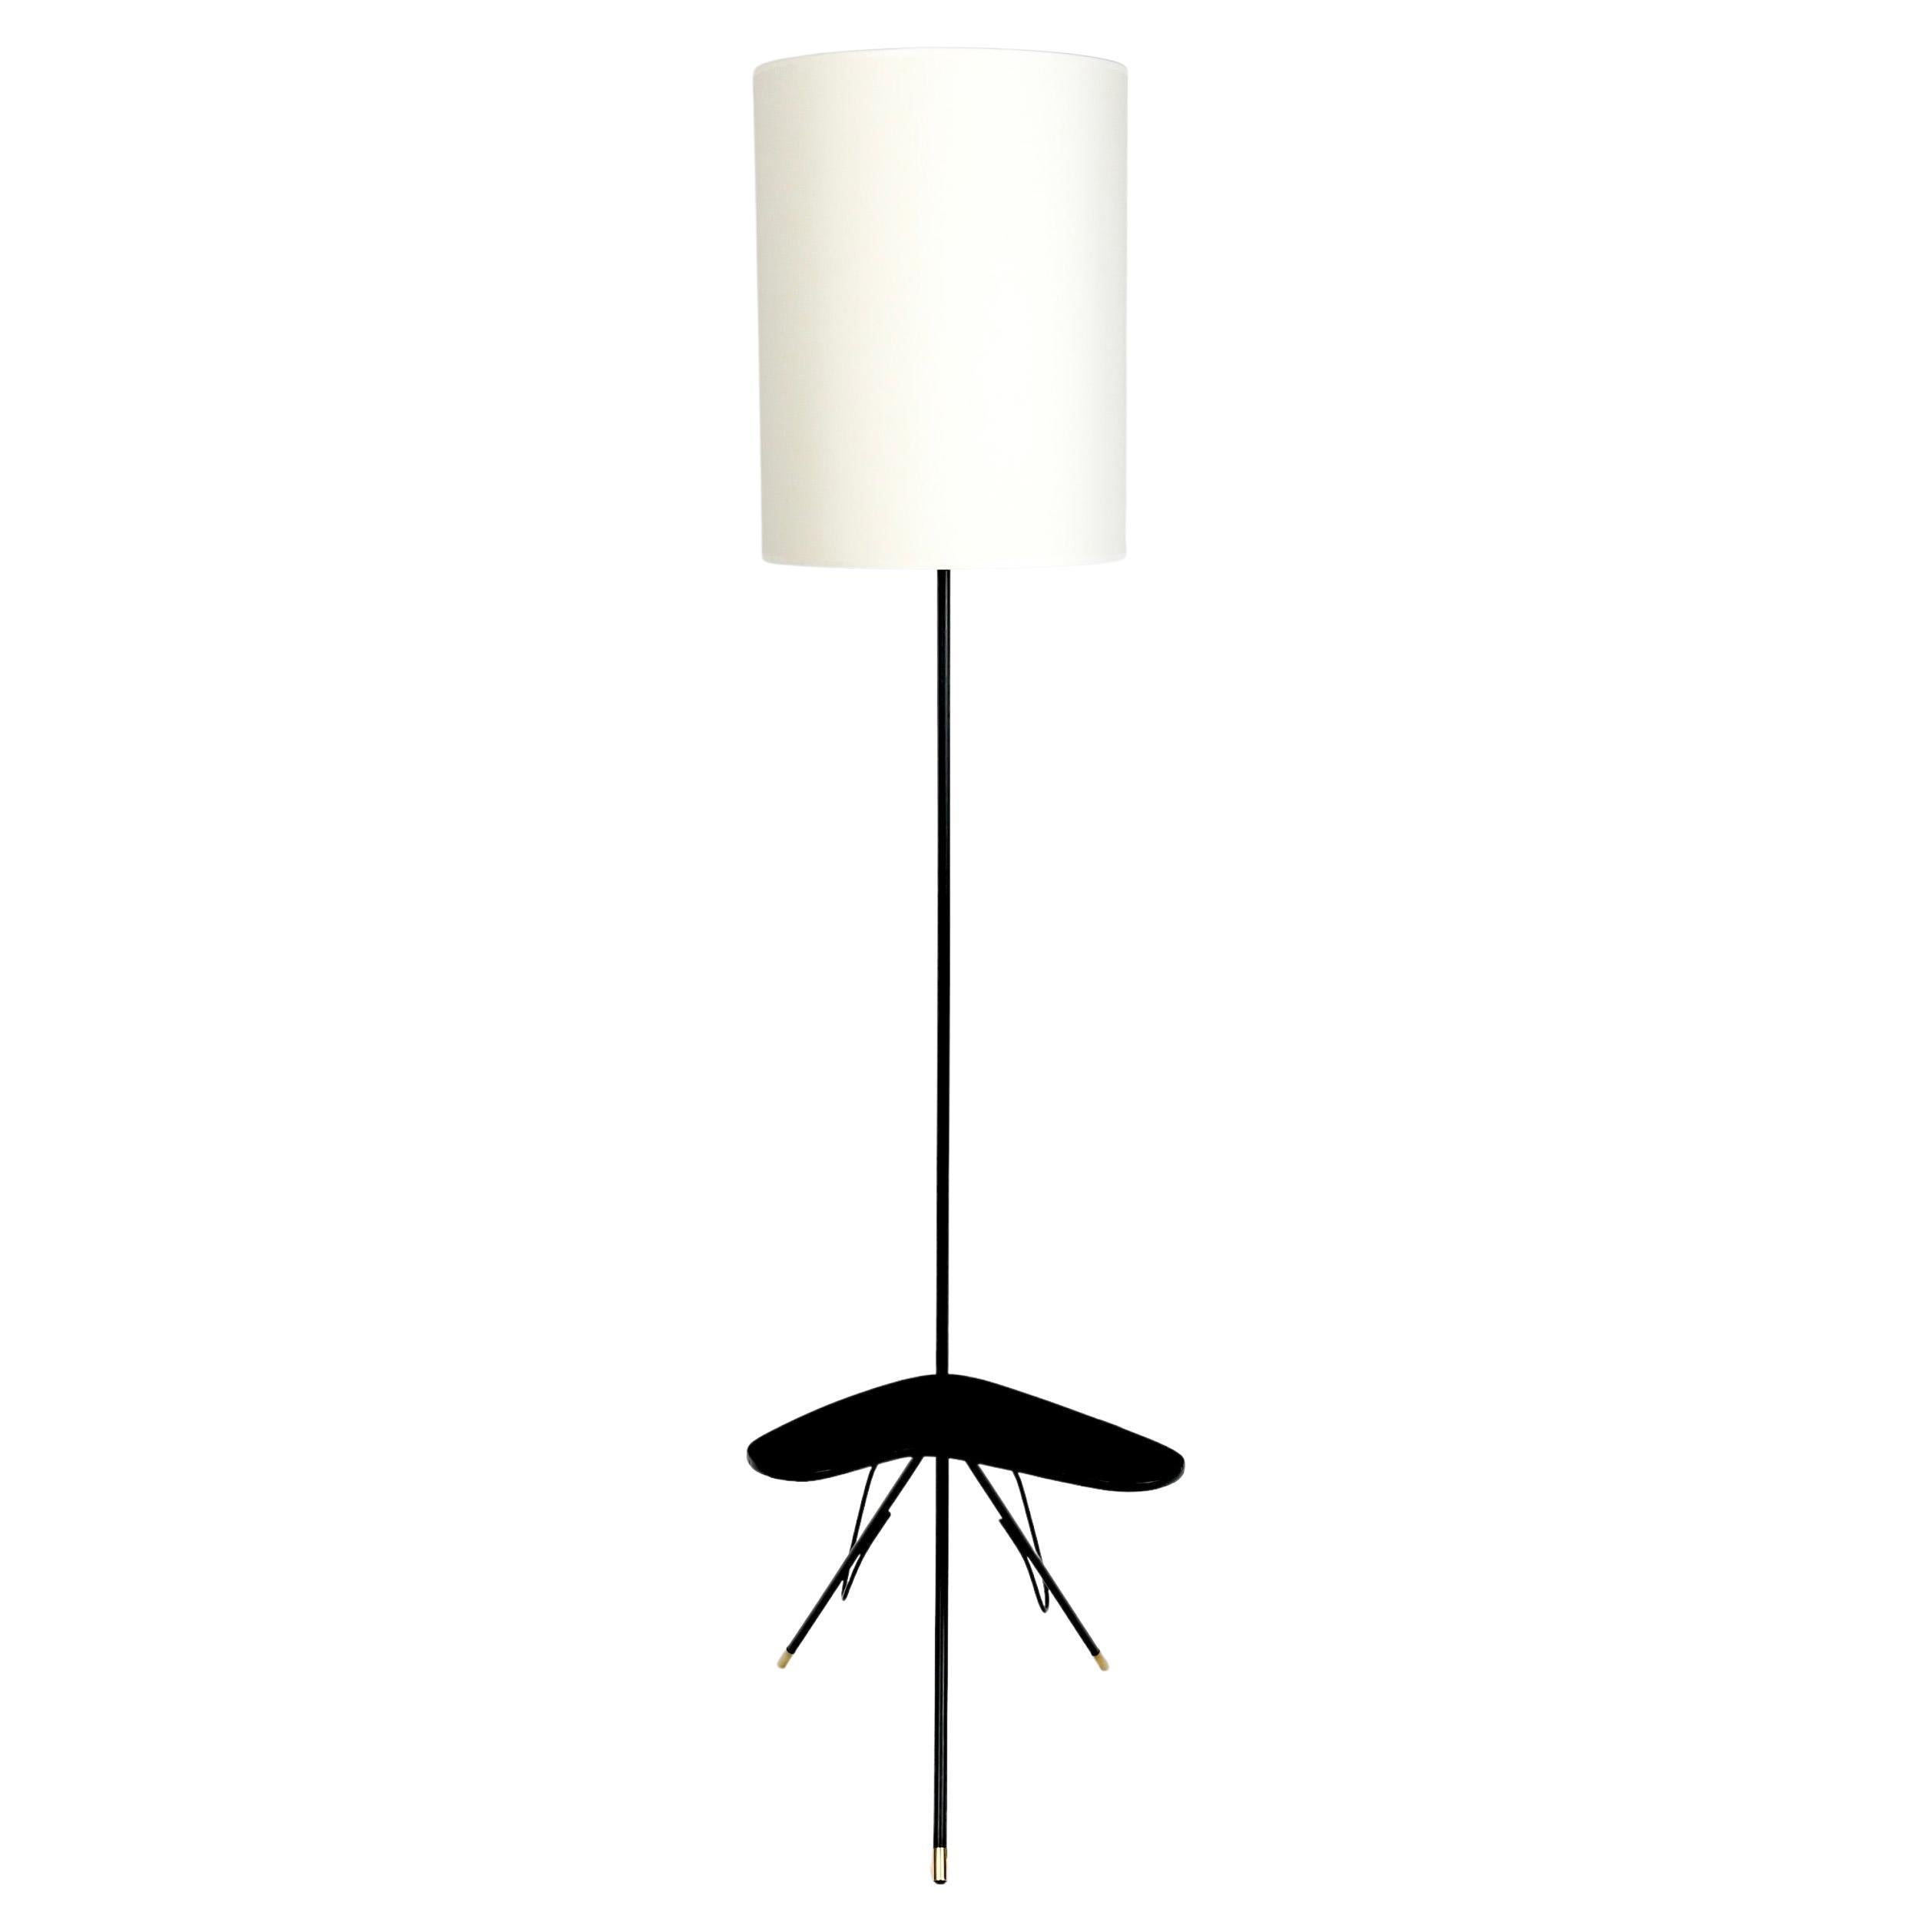 Composed of a central rod dressed on the upper part of a cylindrical shade of off-white color redone identically.
On the lower part the stem curves to form a part of the foot, it supports a shelf in the shape of heart in black lacquered wood.
The